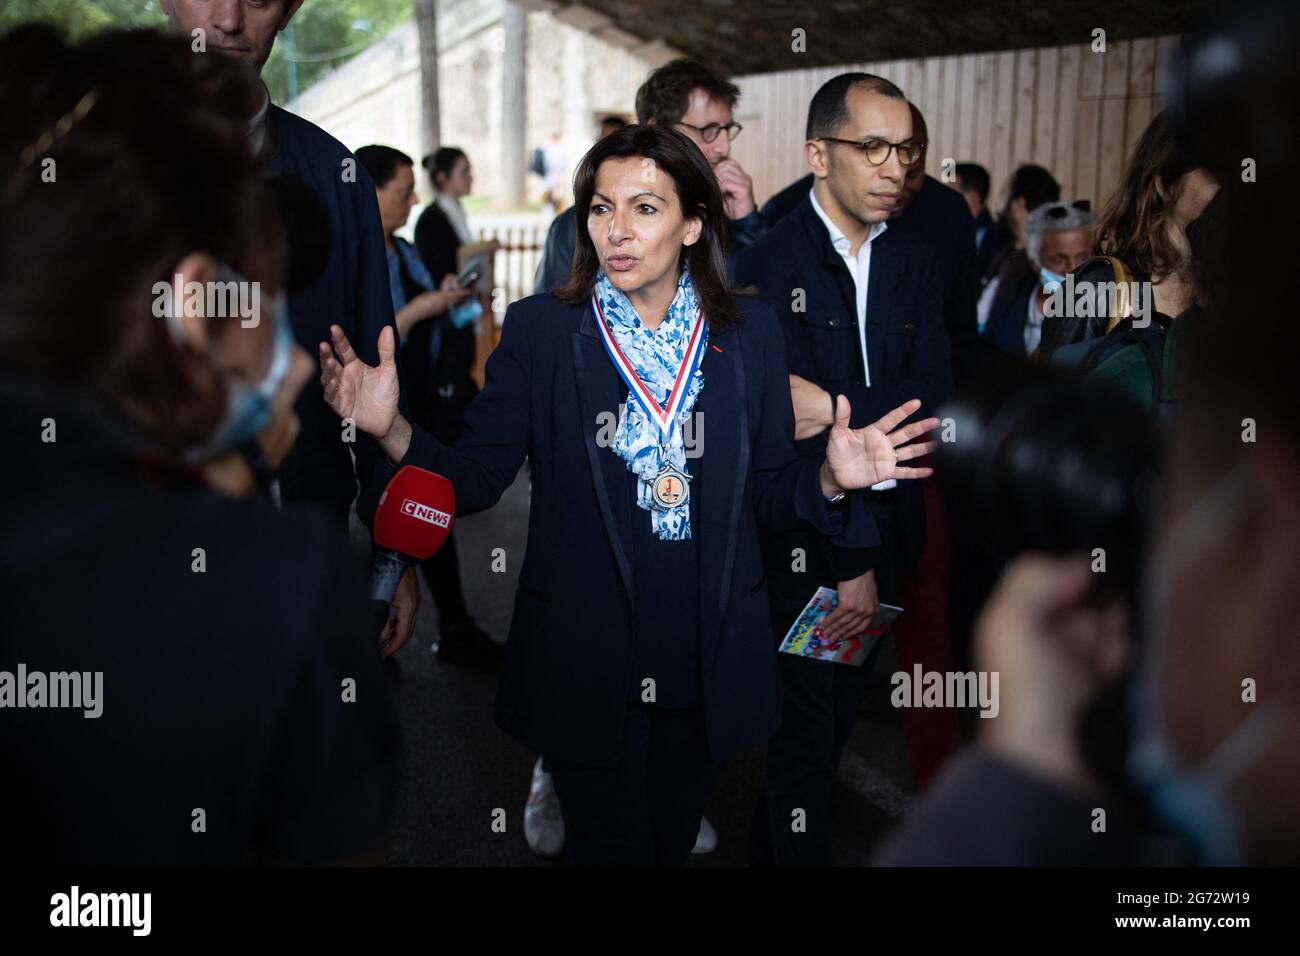 Mayor of Paris Anne Hidalgo wear a medal given by a man as she walks on the Seine docks as she launches the 2021 edition of the Paris Plage ( Paris Beach ) on the dock of the Seine in Paris, France on July 10, 2021. Photo by Raphael Lafargue/ABACAPRESS.COM Stock Photo